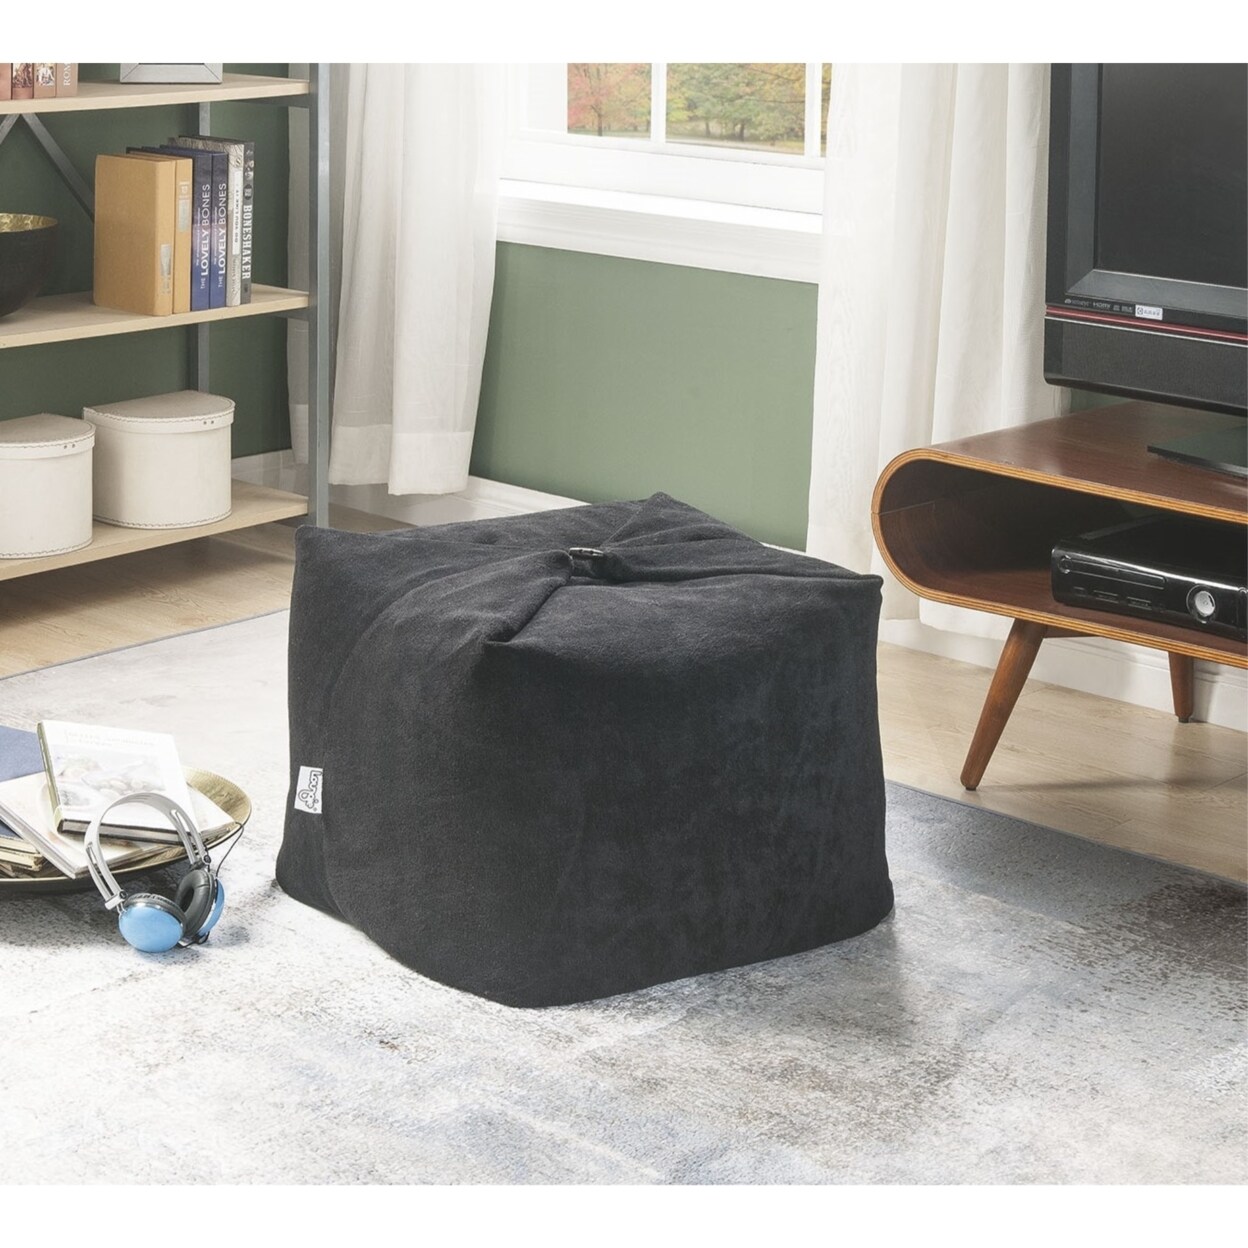 Loungie   Magic Pouf Beanbag-Microplush Fabric-3-in-1 Convertible Ottoman + Chair + Floor Pillow-Modern and Functional